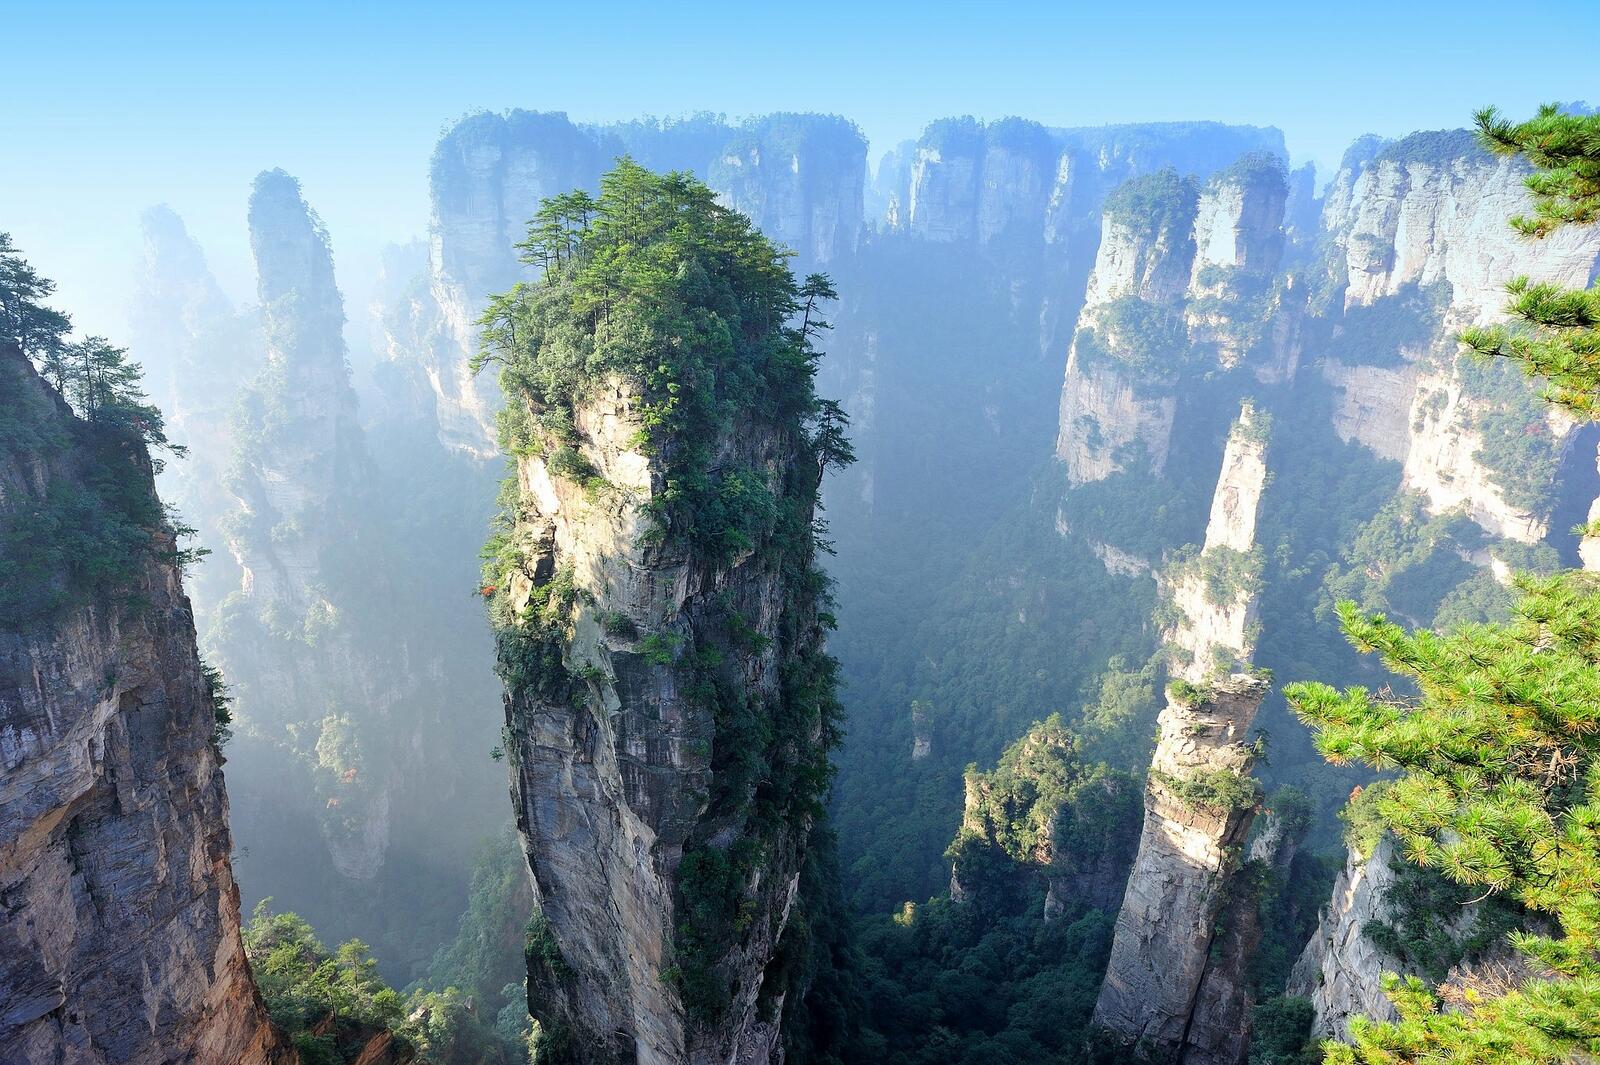 Wallpapers China rock towers wallpaper zhangjiajie national forest park on the desktop